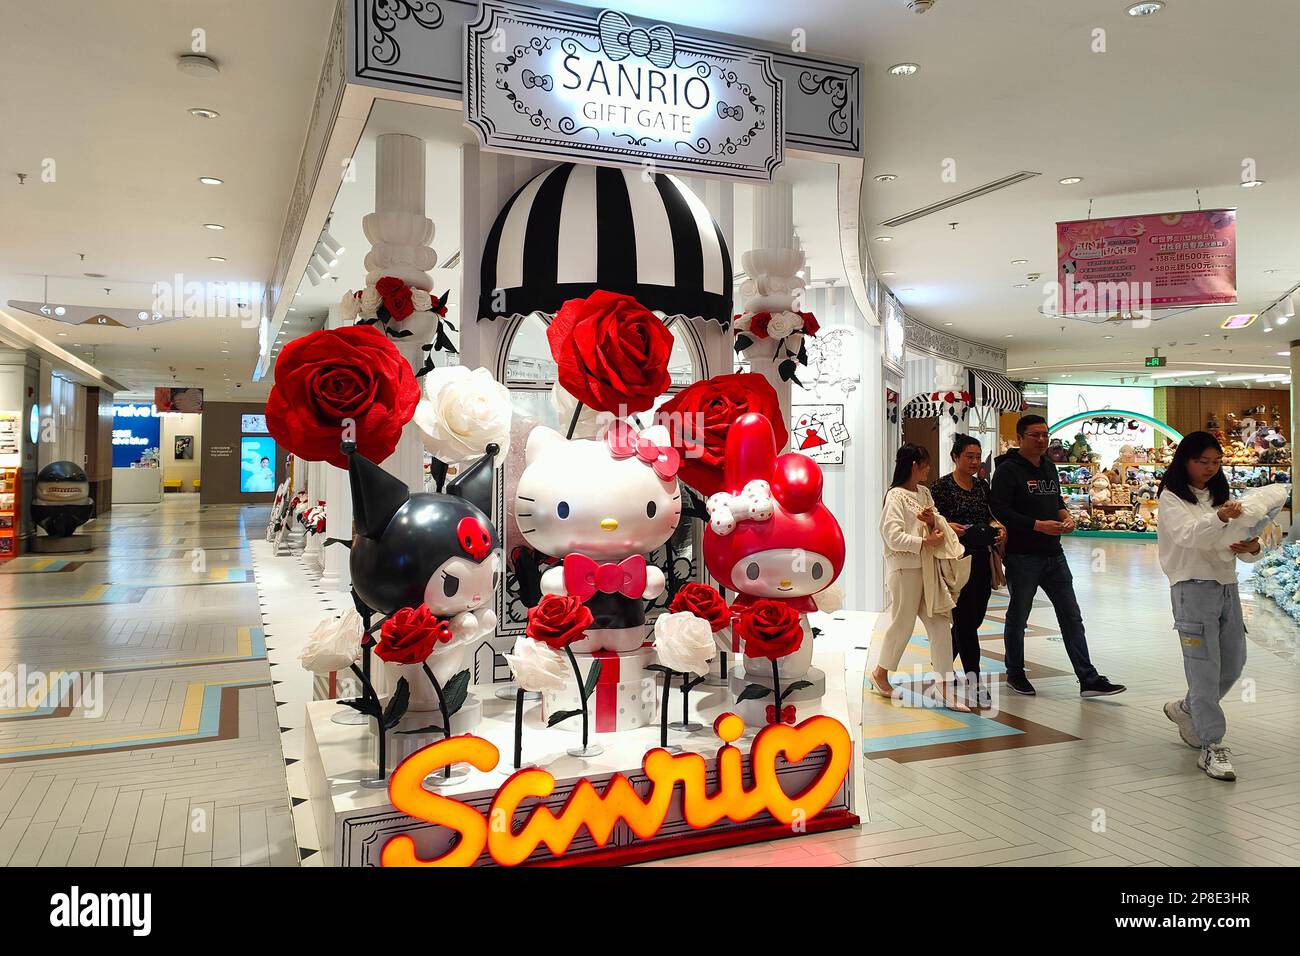 Hello Kitty Owner Sanrio Soars on China License Deal With Alibaba Unit -  Bloomberg